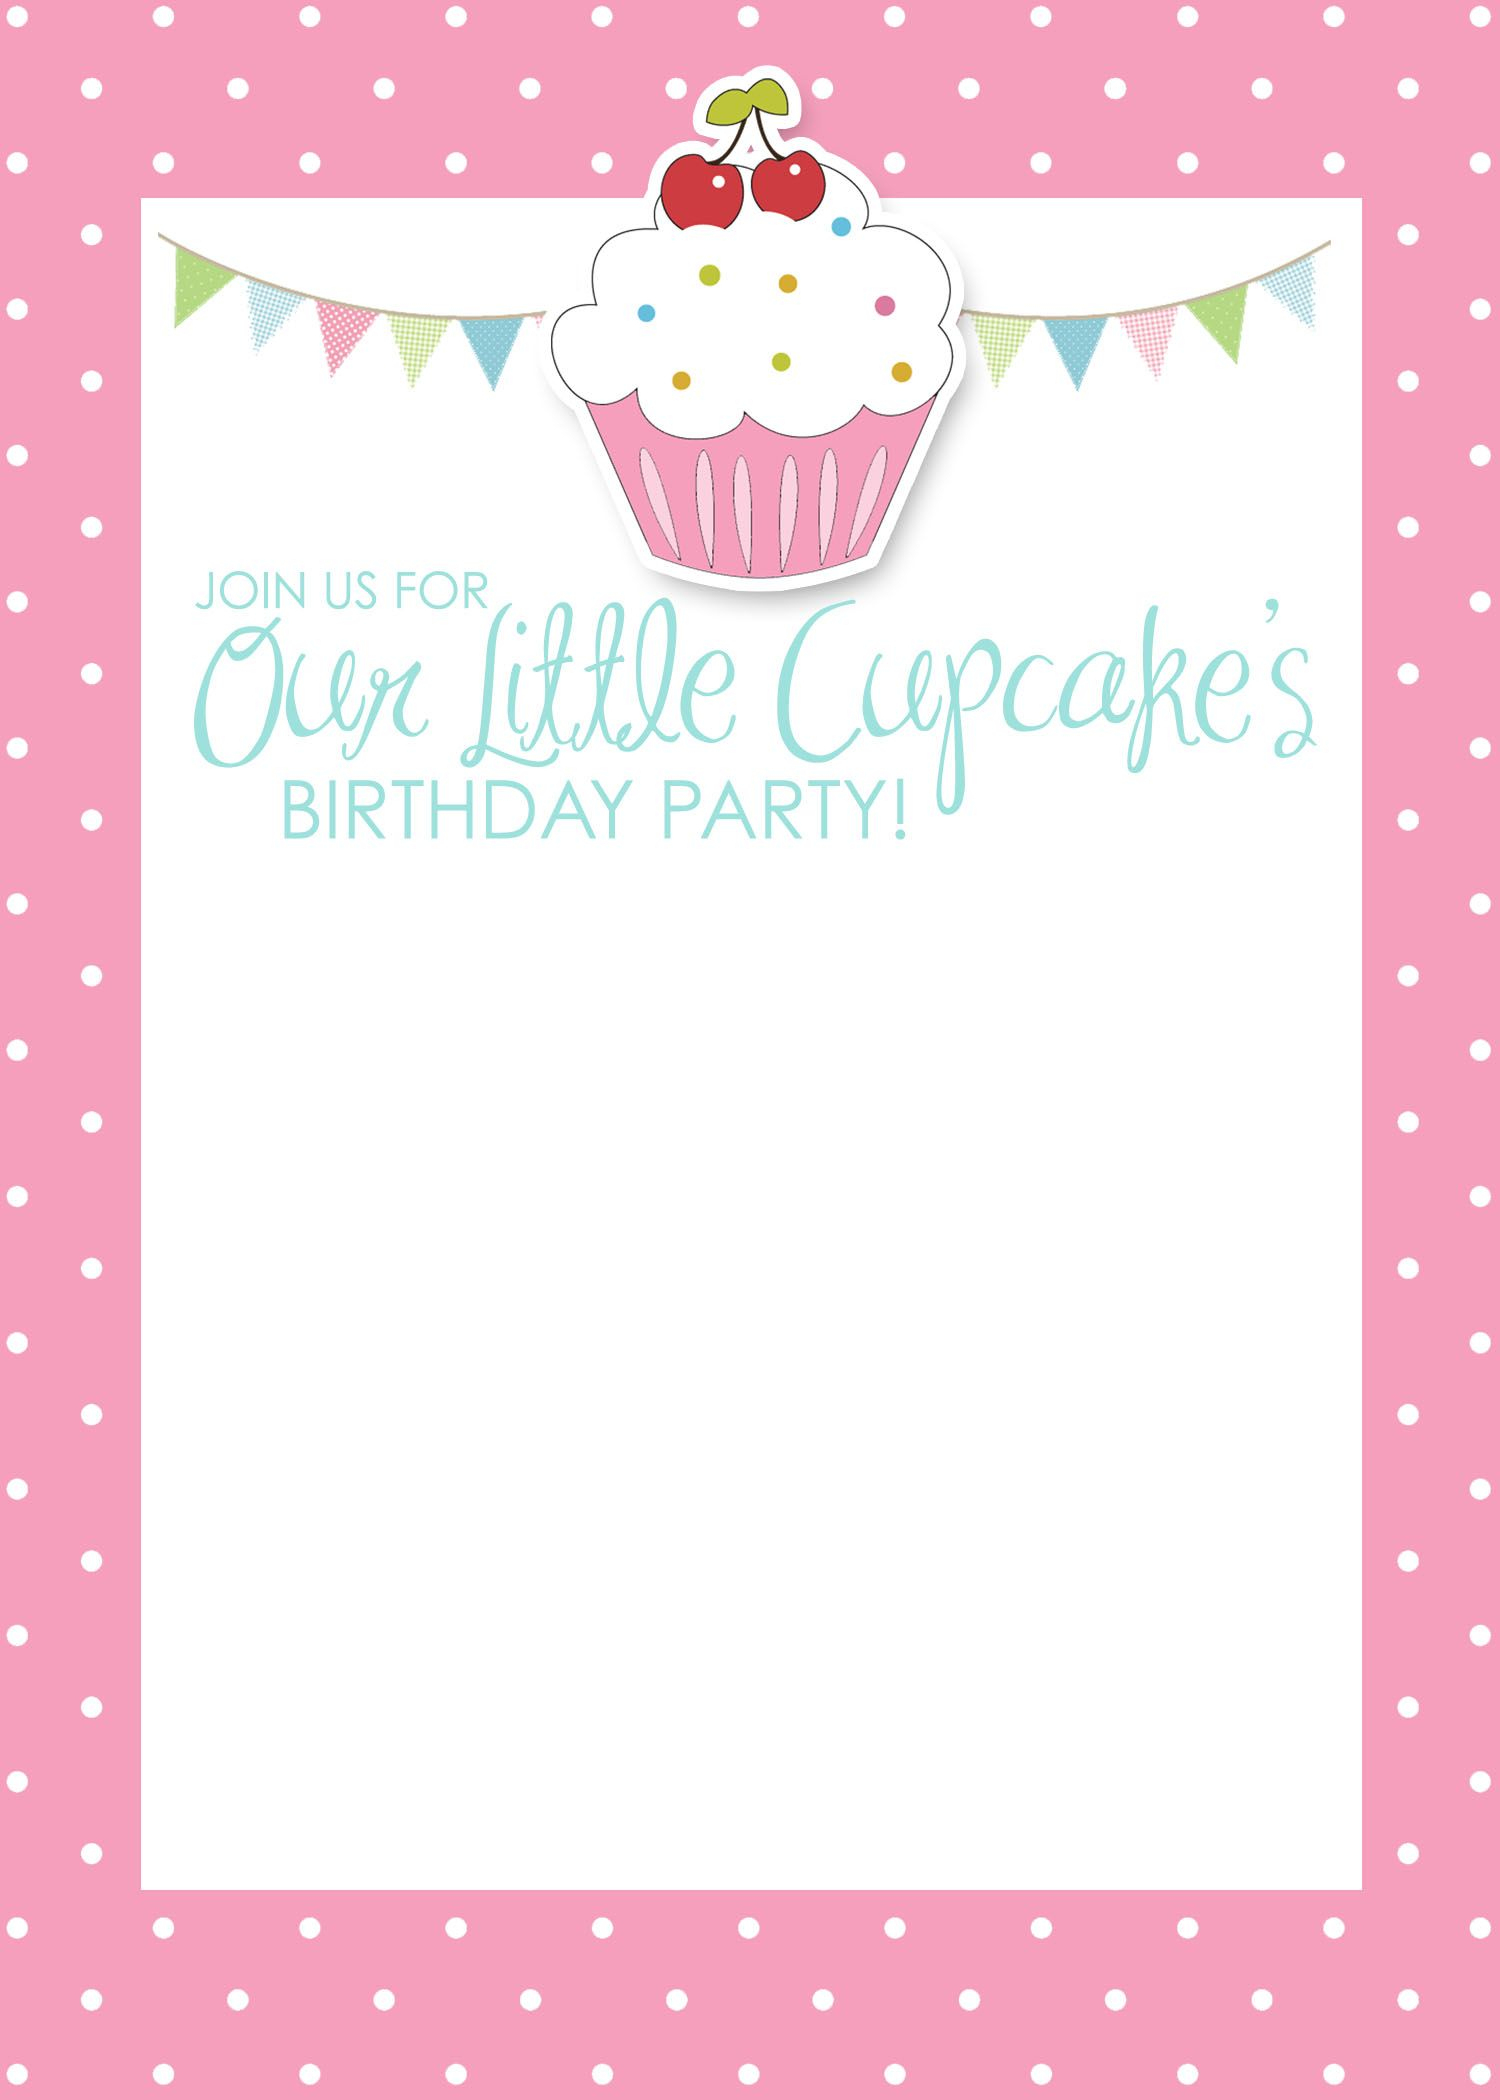 Cupcake Birthday Party With Free Printables | Parties W/ Pizzaz - Free Printable Polka Dot Birthday Party Invitations